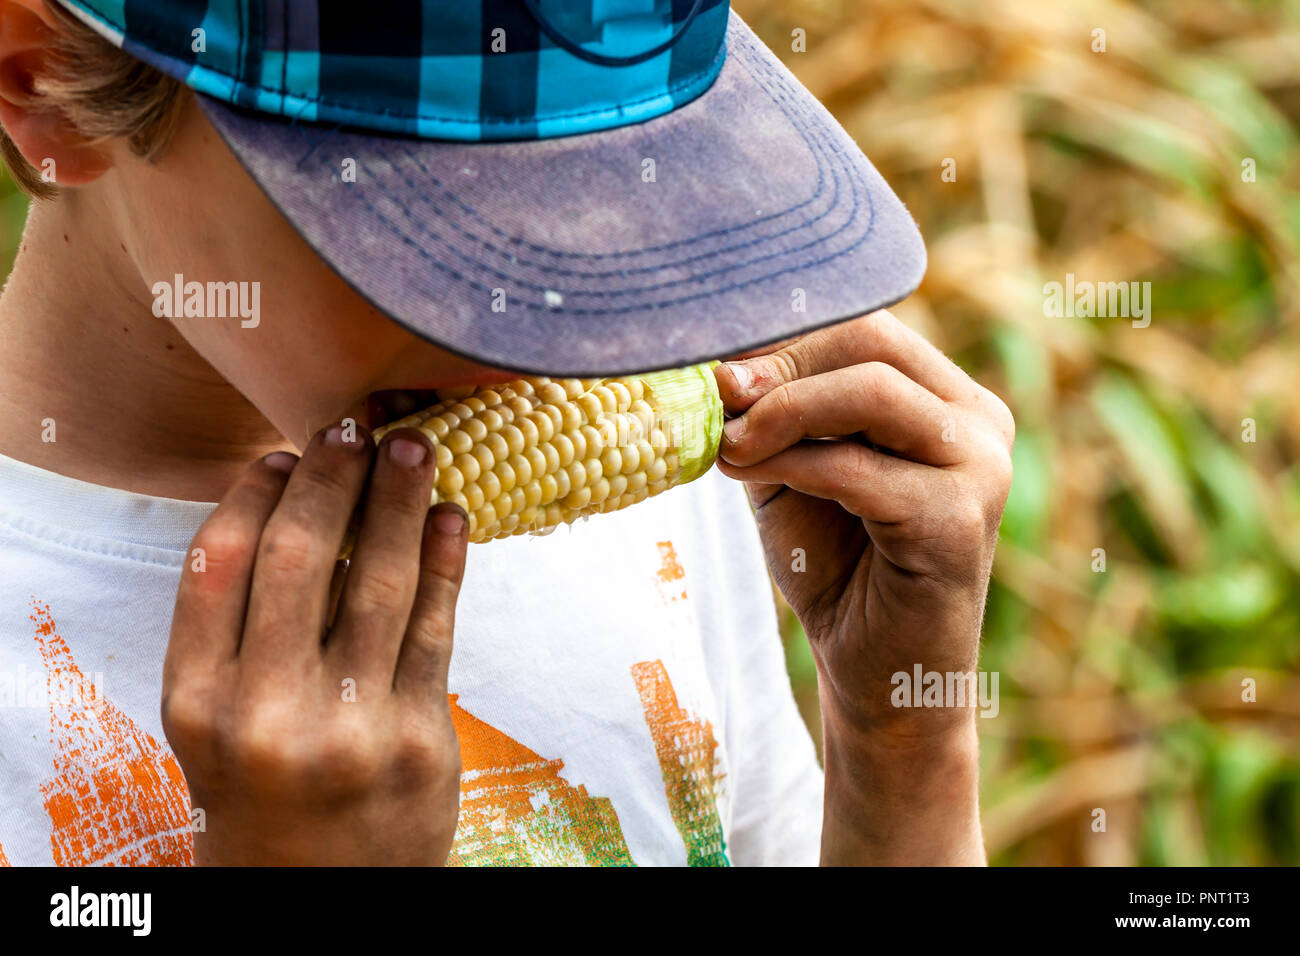 Boy with dirty hands eating a corncob in the field. Stock Photo